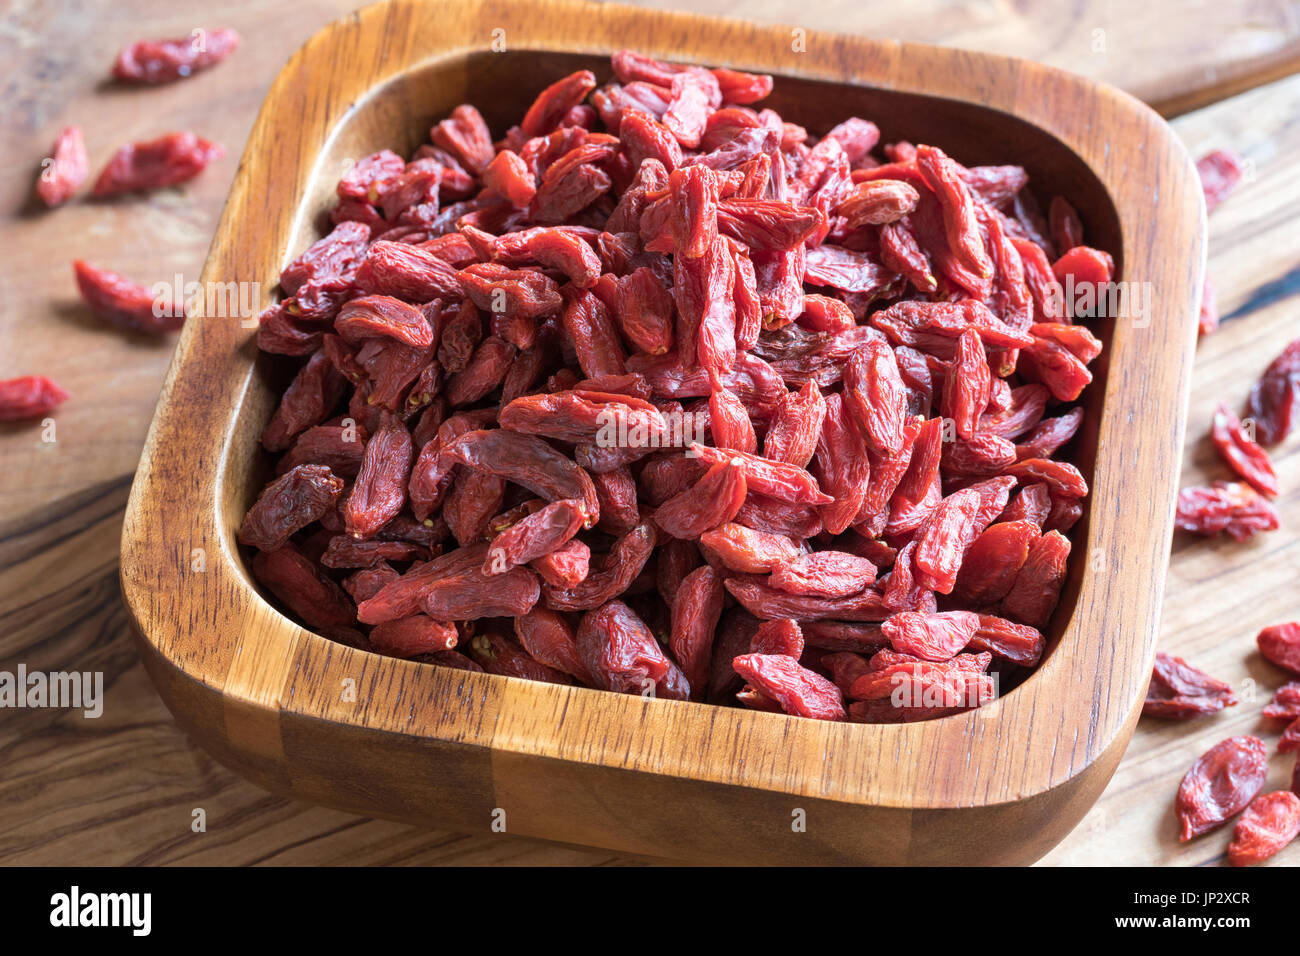 Dried goji berries in a wooden bowl Stock Photo